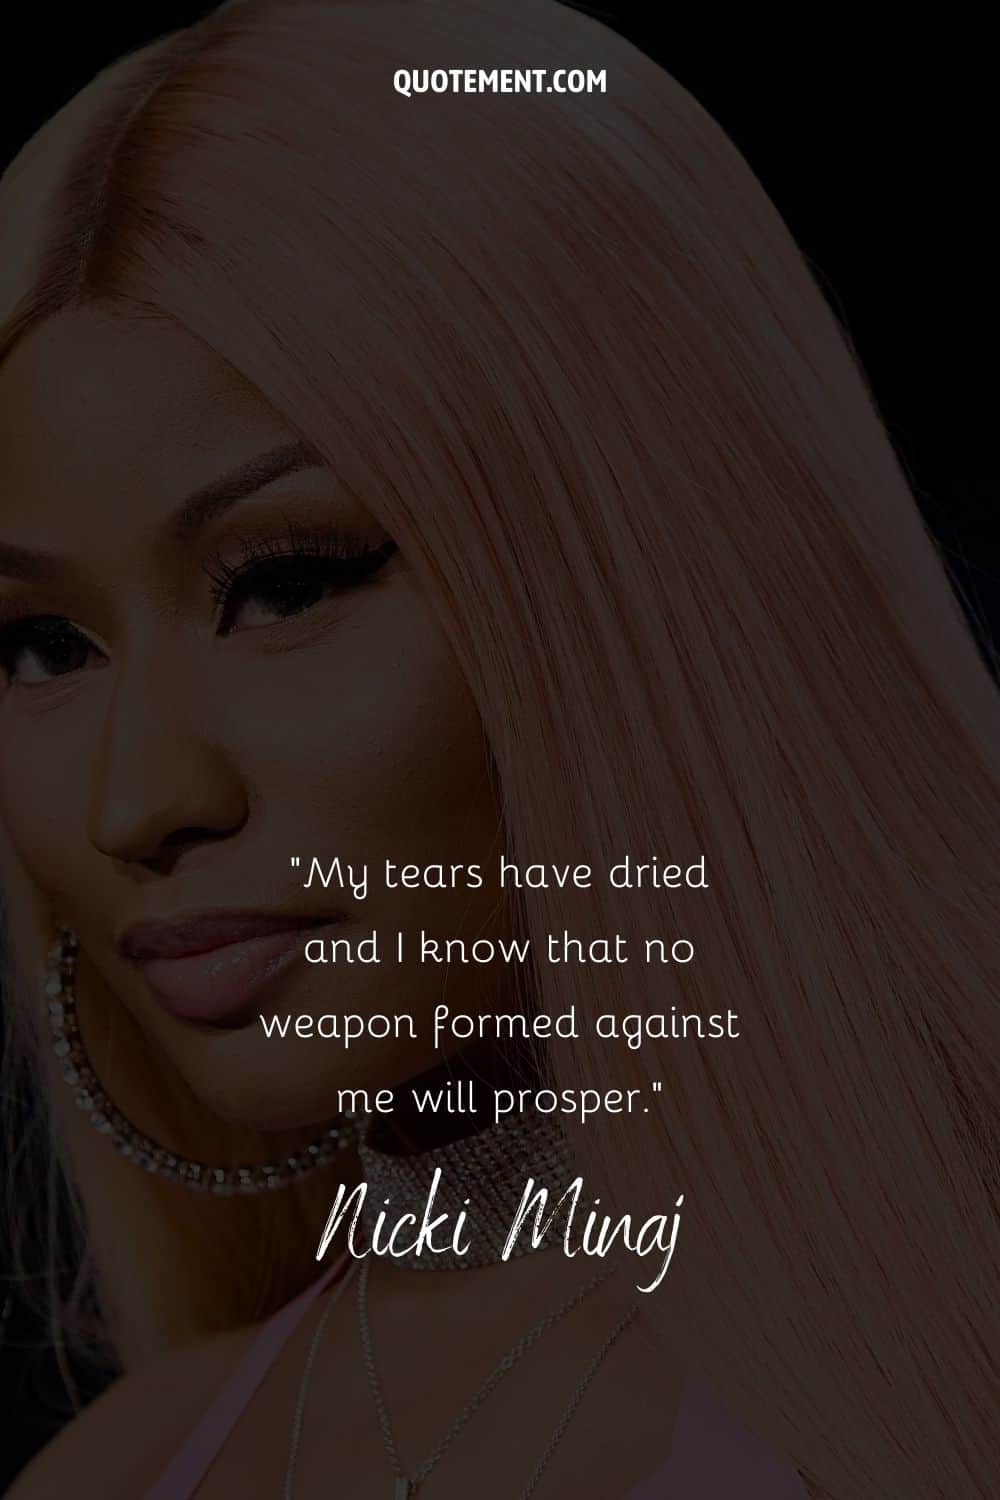 Sassy quote by the female rapper Nicki Minaj and her photo in the background as well